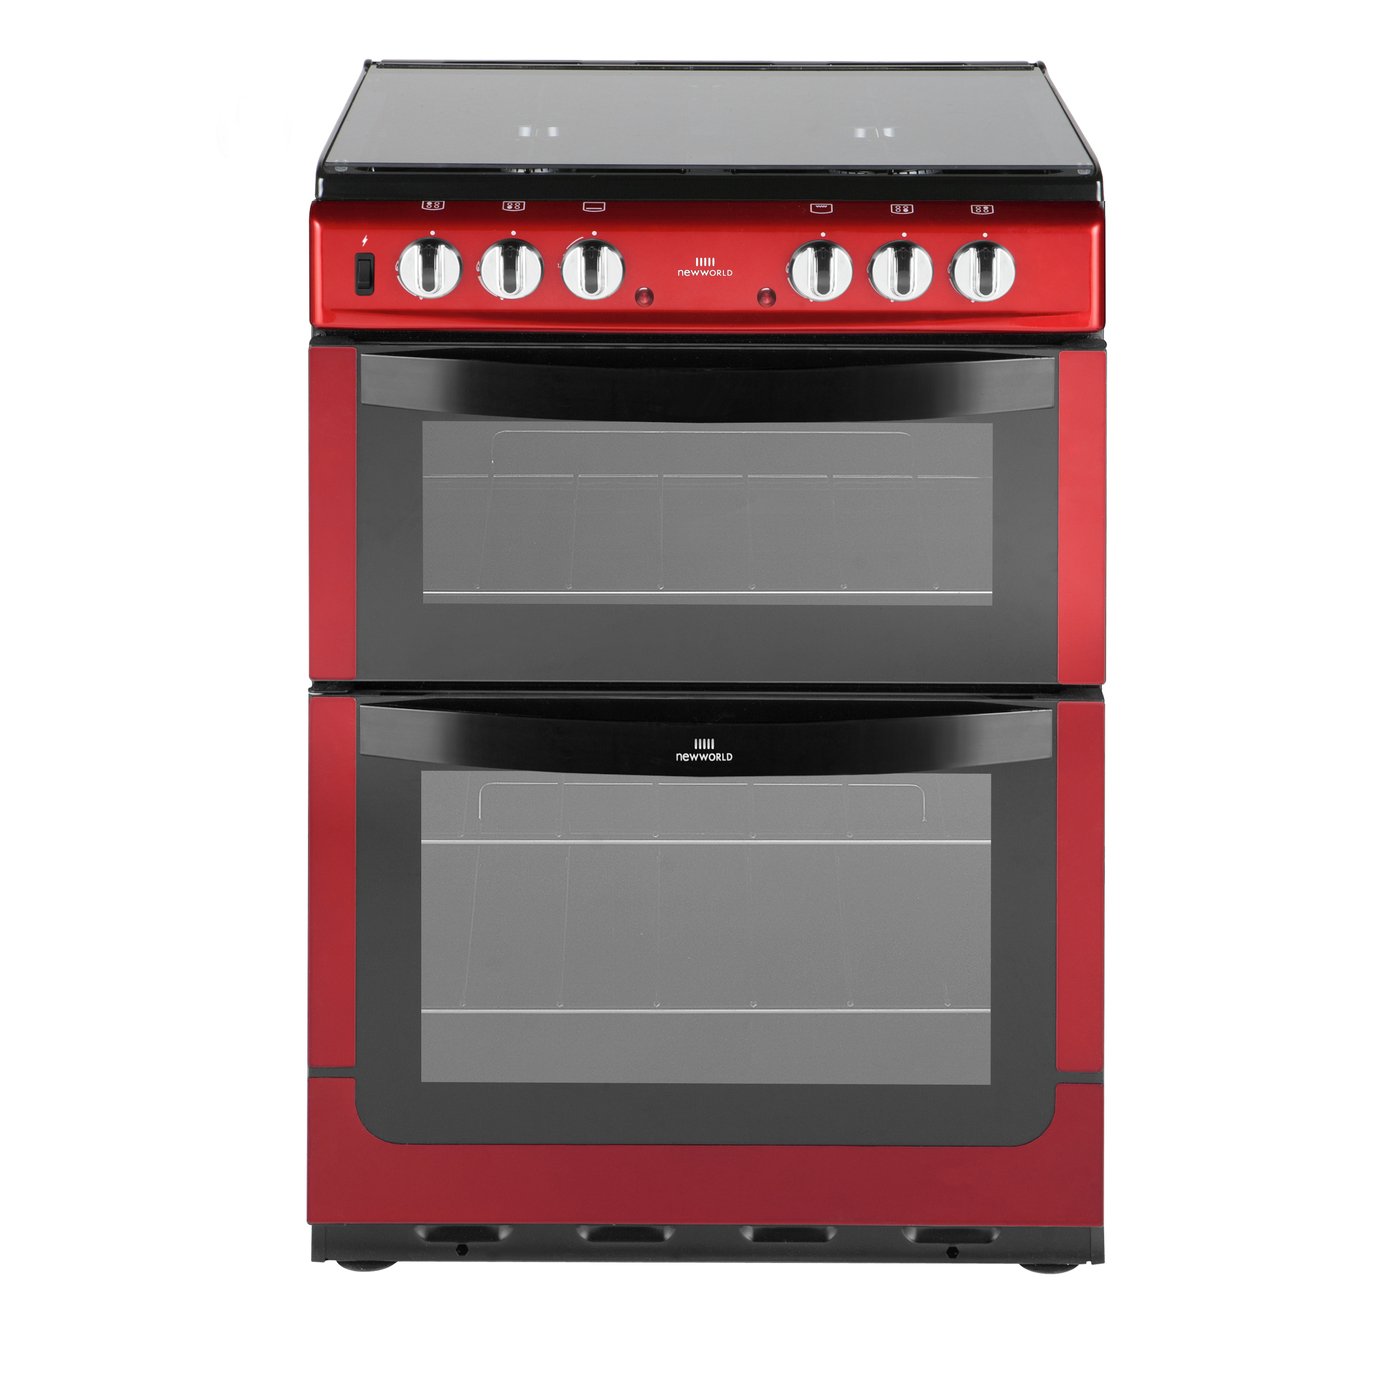 New World 601DFDOL Double Dual Fuel Cooker - Red